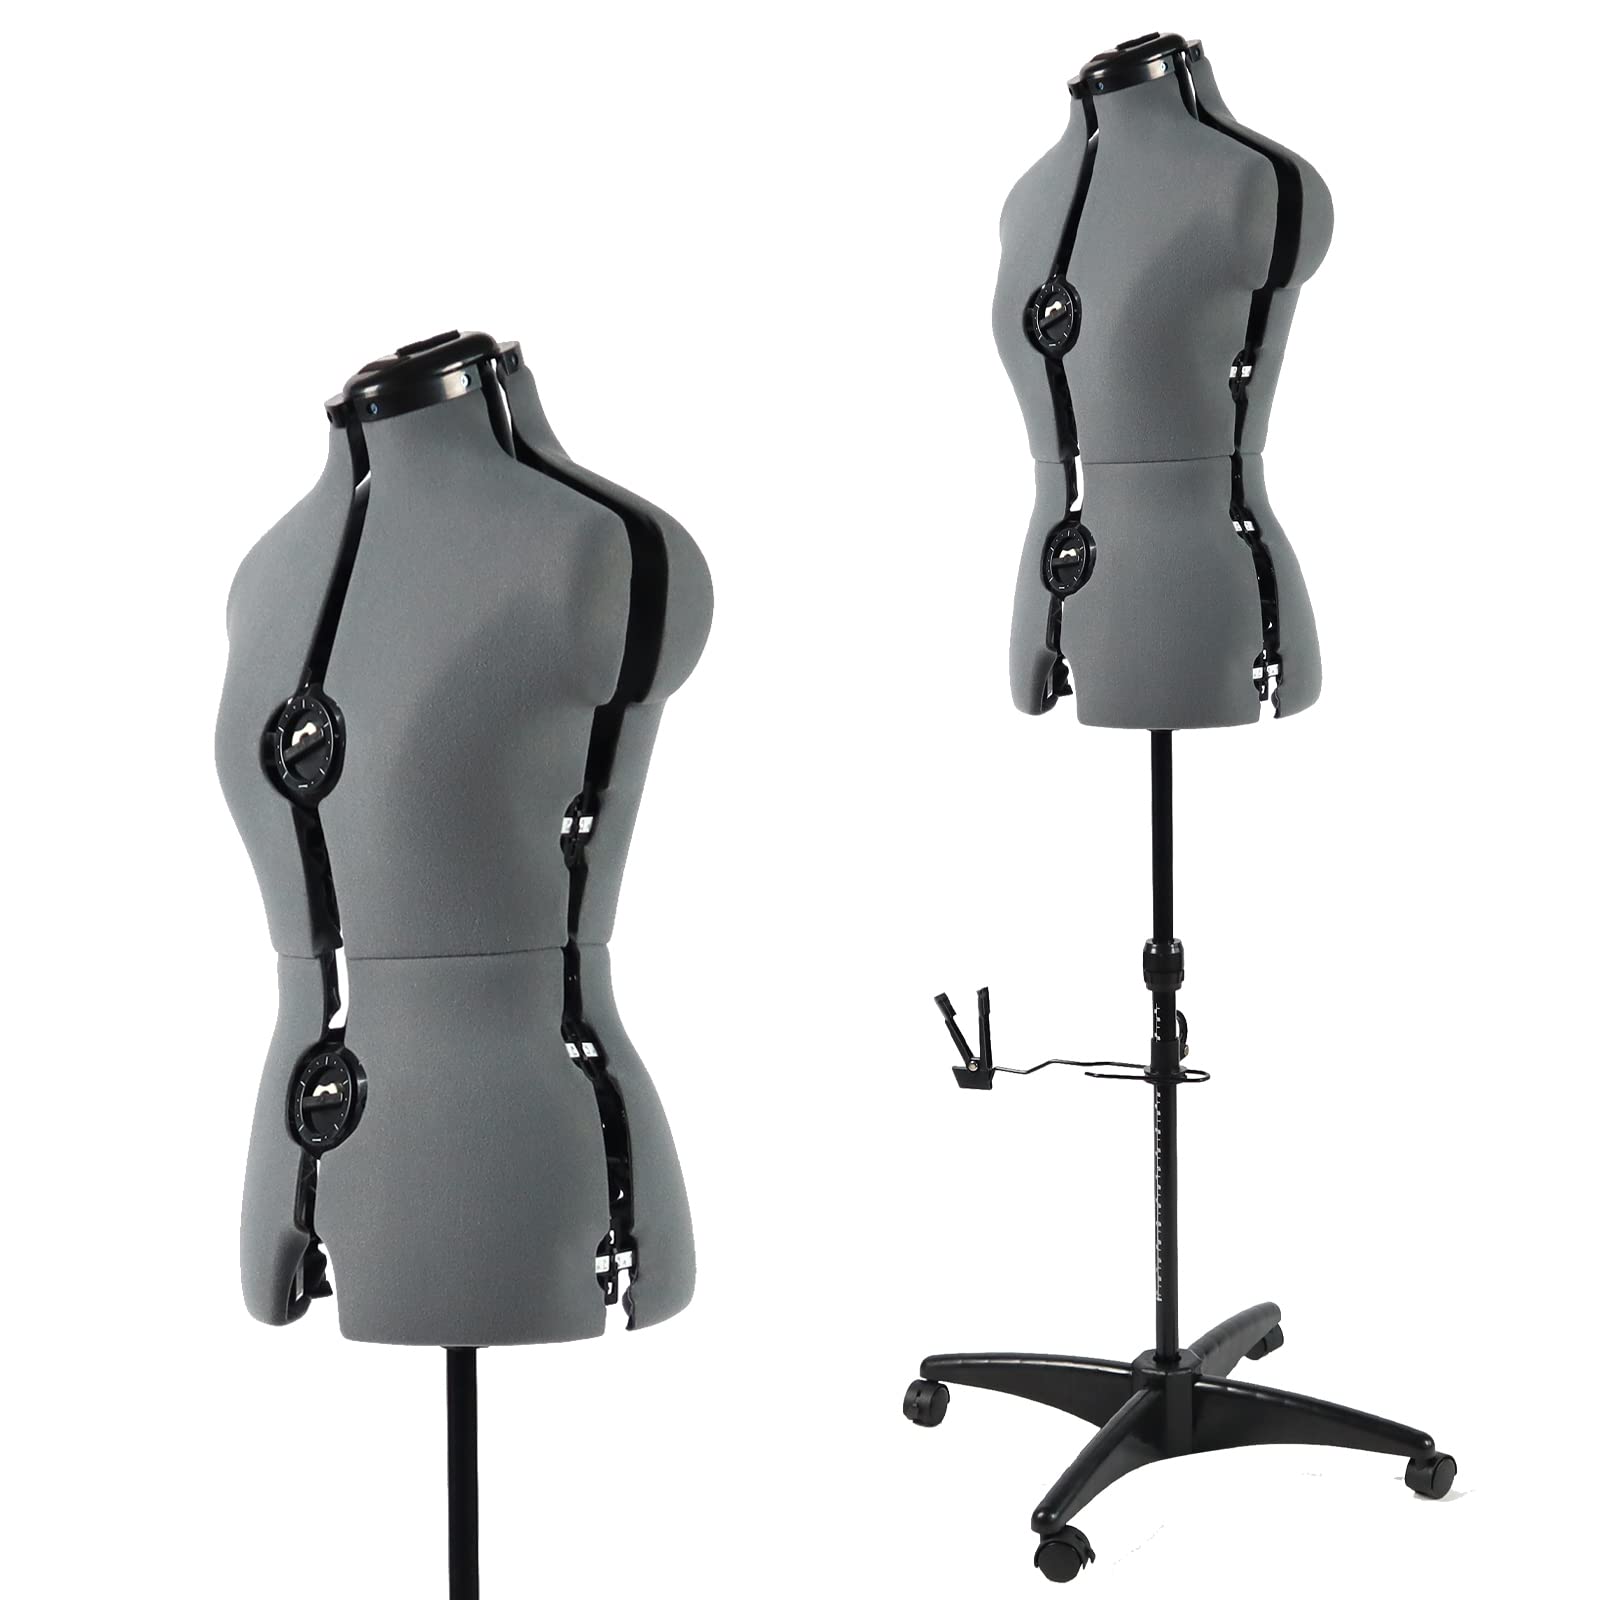 PDM WORLDWIDE Adjustable Dress Form Mannequin for Sewing Female Size 6-14, Gray Pinnable Model Body with 13 Dials, Detachable Metal Rolling Base, 42.5"-60" Height Range for Clothing Display, Small